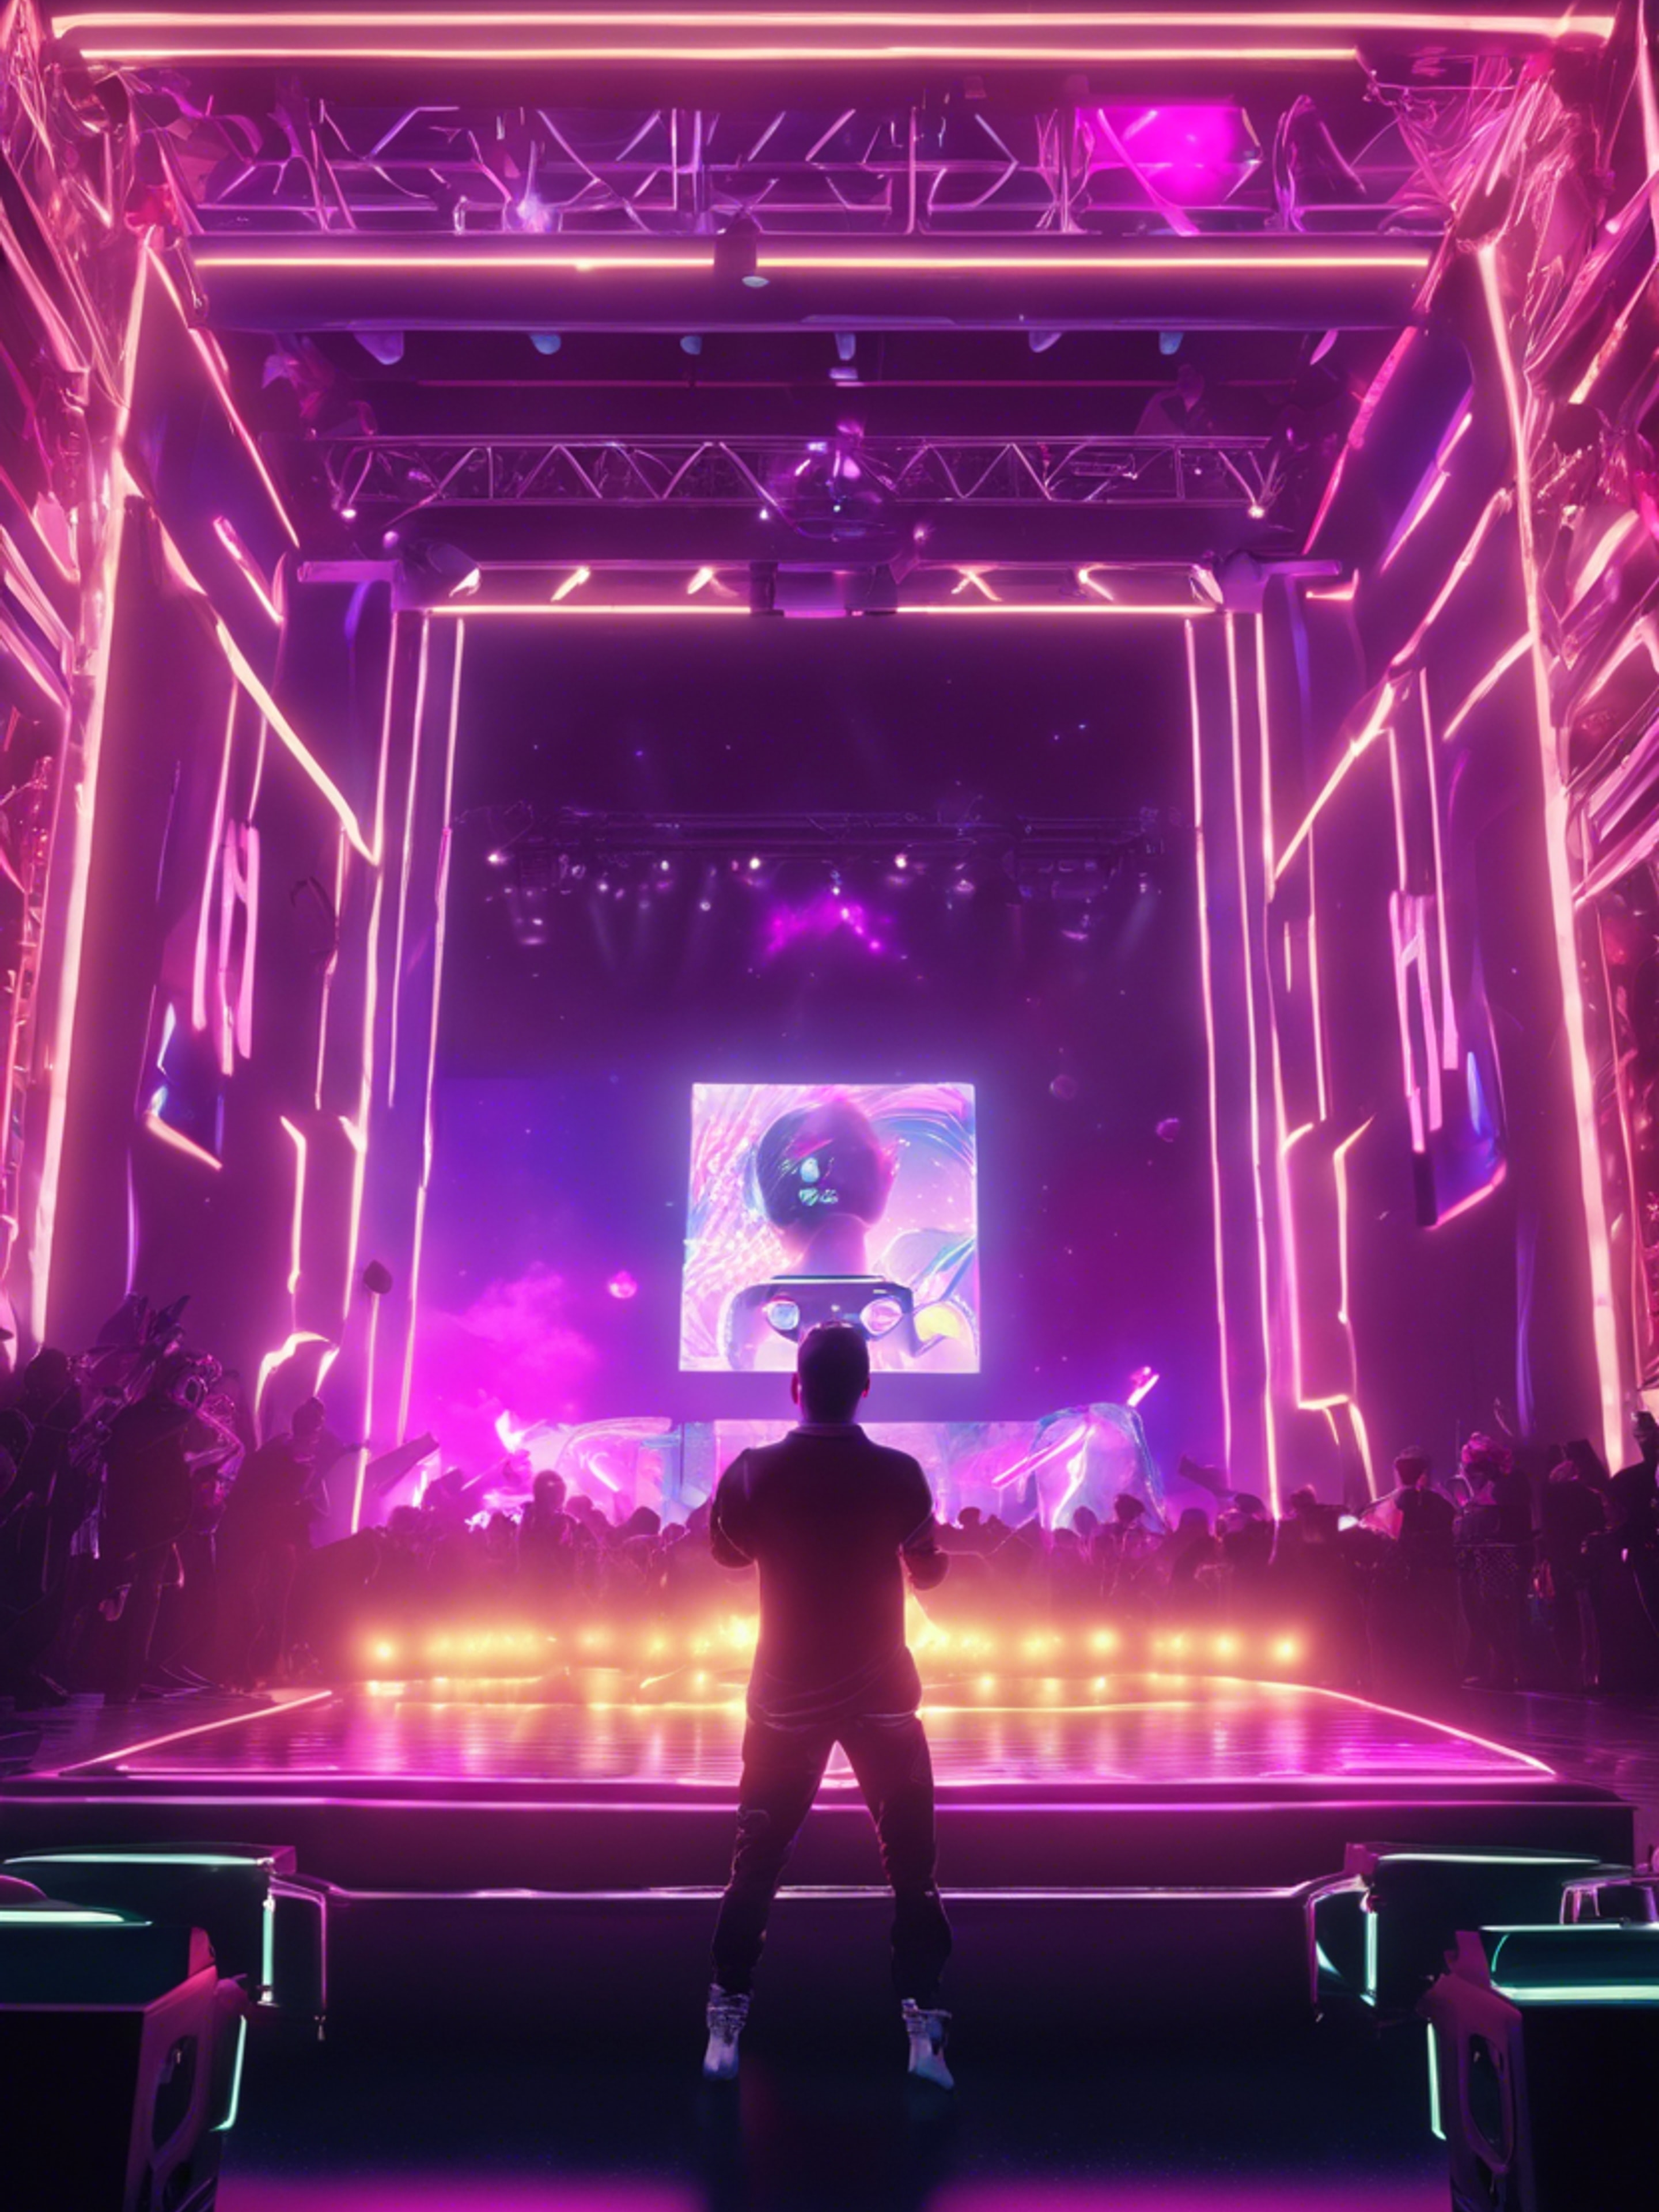 A virtual concert in a Y2K gaming environment, with neon spotlights showcasing a digital avatar performing onstage. Ταπετσαρία[570c0802add746f5a0b1]